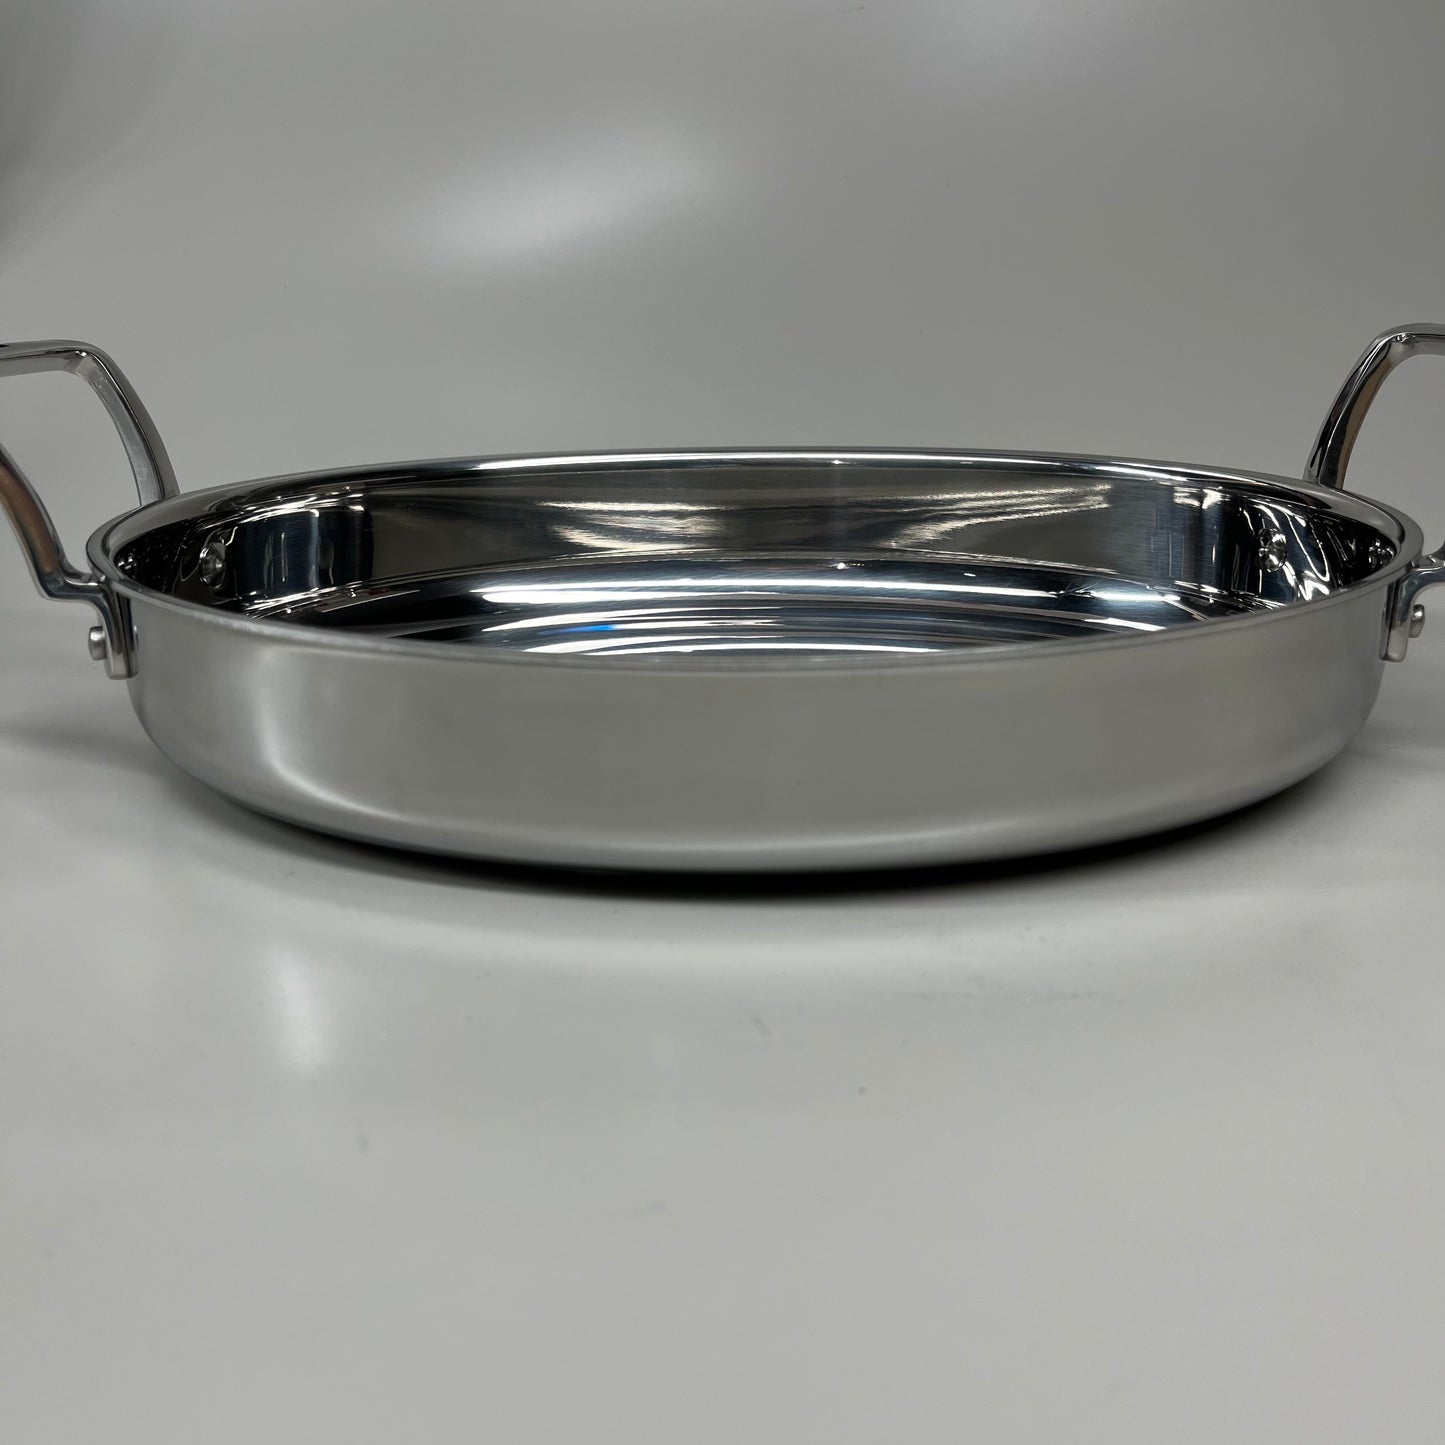 BROWNE Thermalloy Oval Stainless Steel Roast Pan 11" x 8.7" x 2" 5724177 (New)